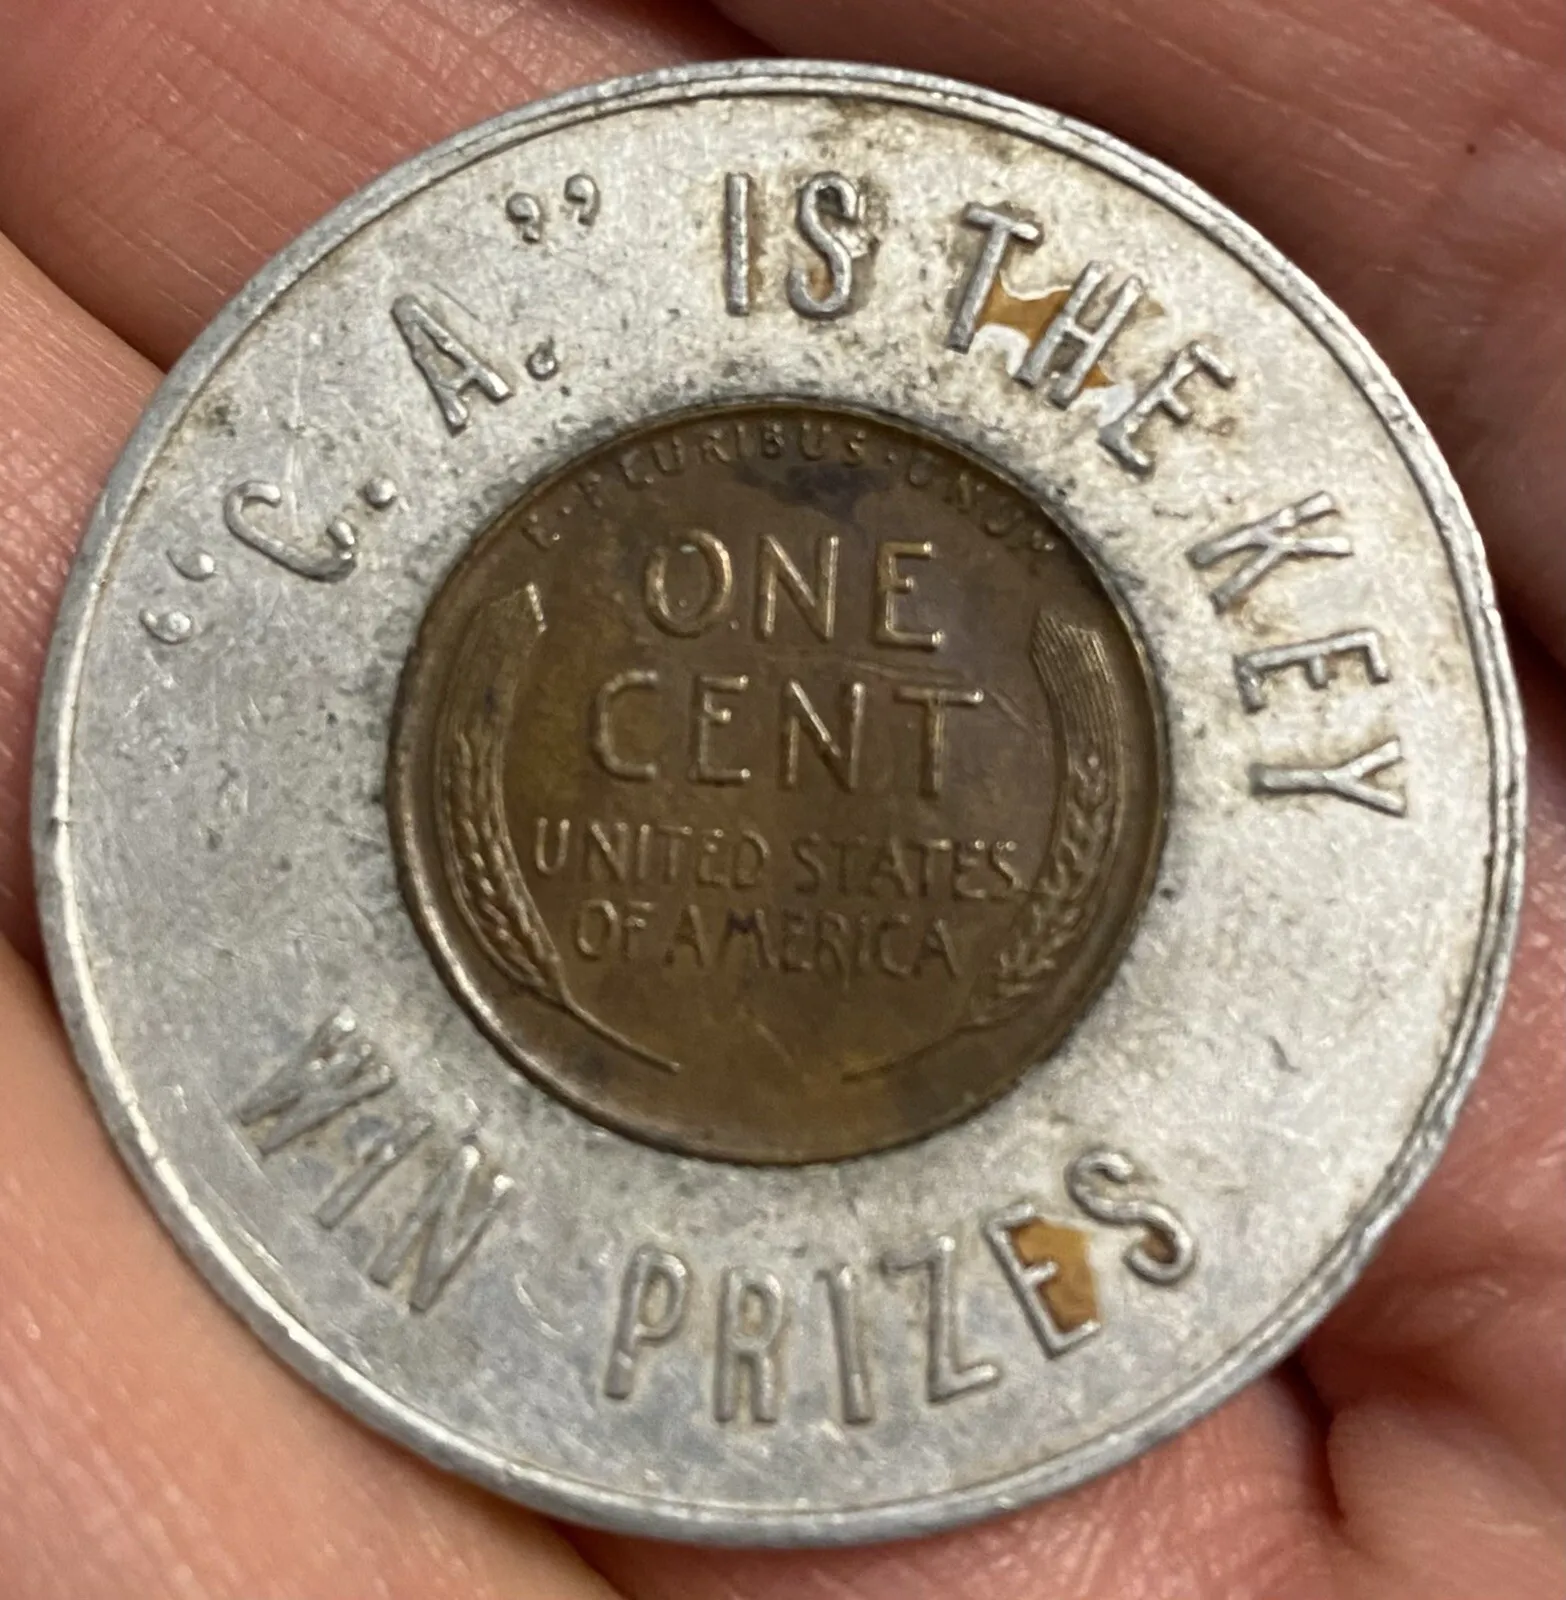 1946 “C.A.” Is The Key Win Prized Encased Cent